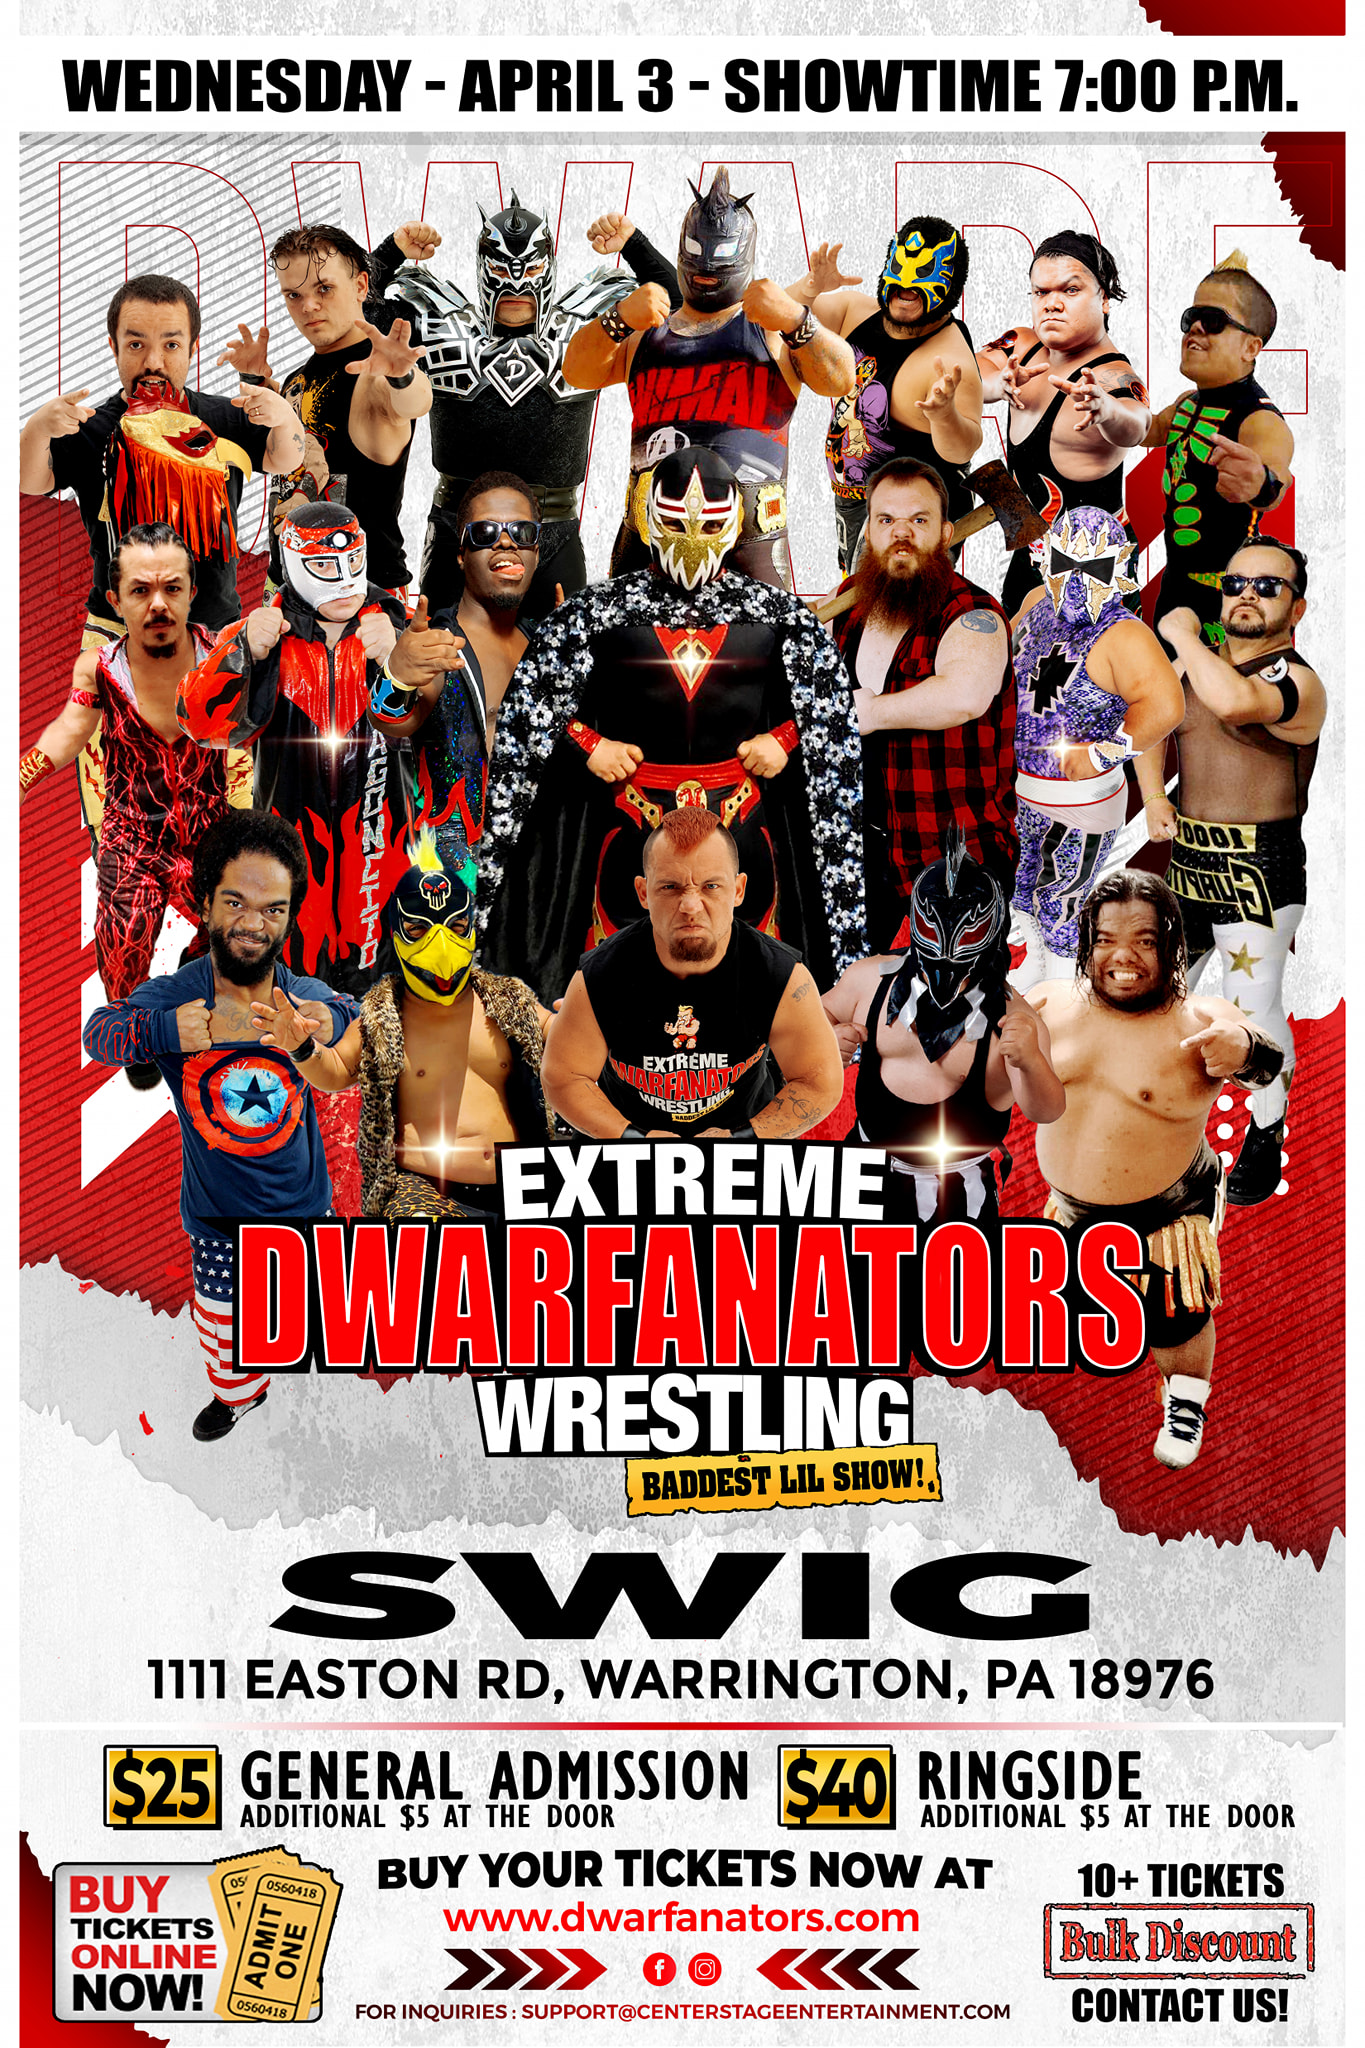 Promotional poster for "extreme dwarfanators wrestling" event showcasing various wrestlers, scheduled for wednesday, april 3rd at 7:00 pm.